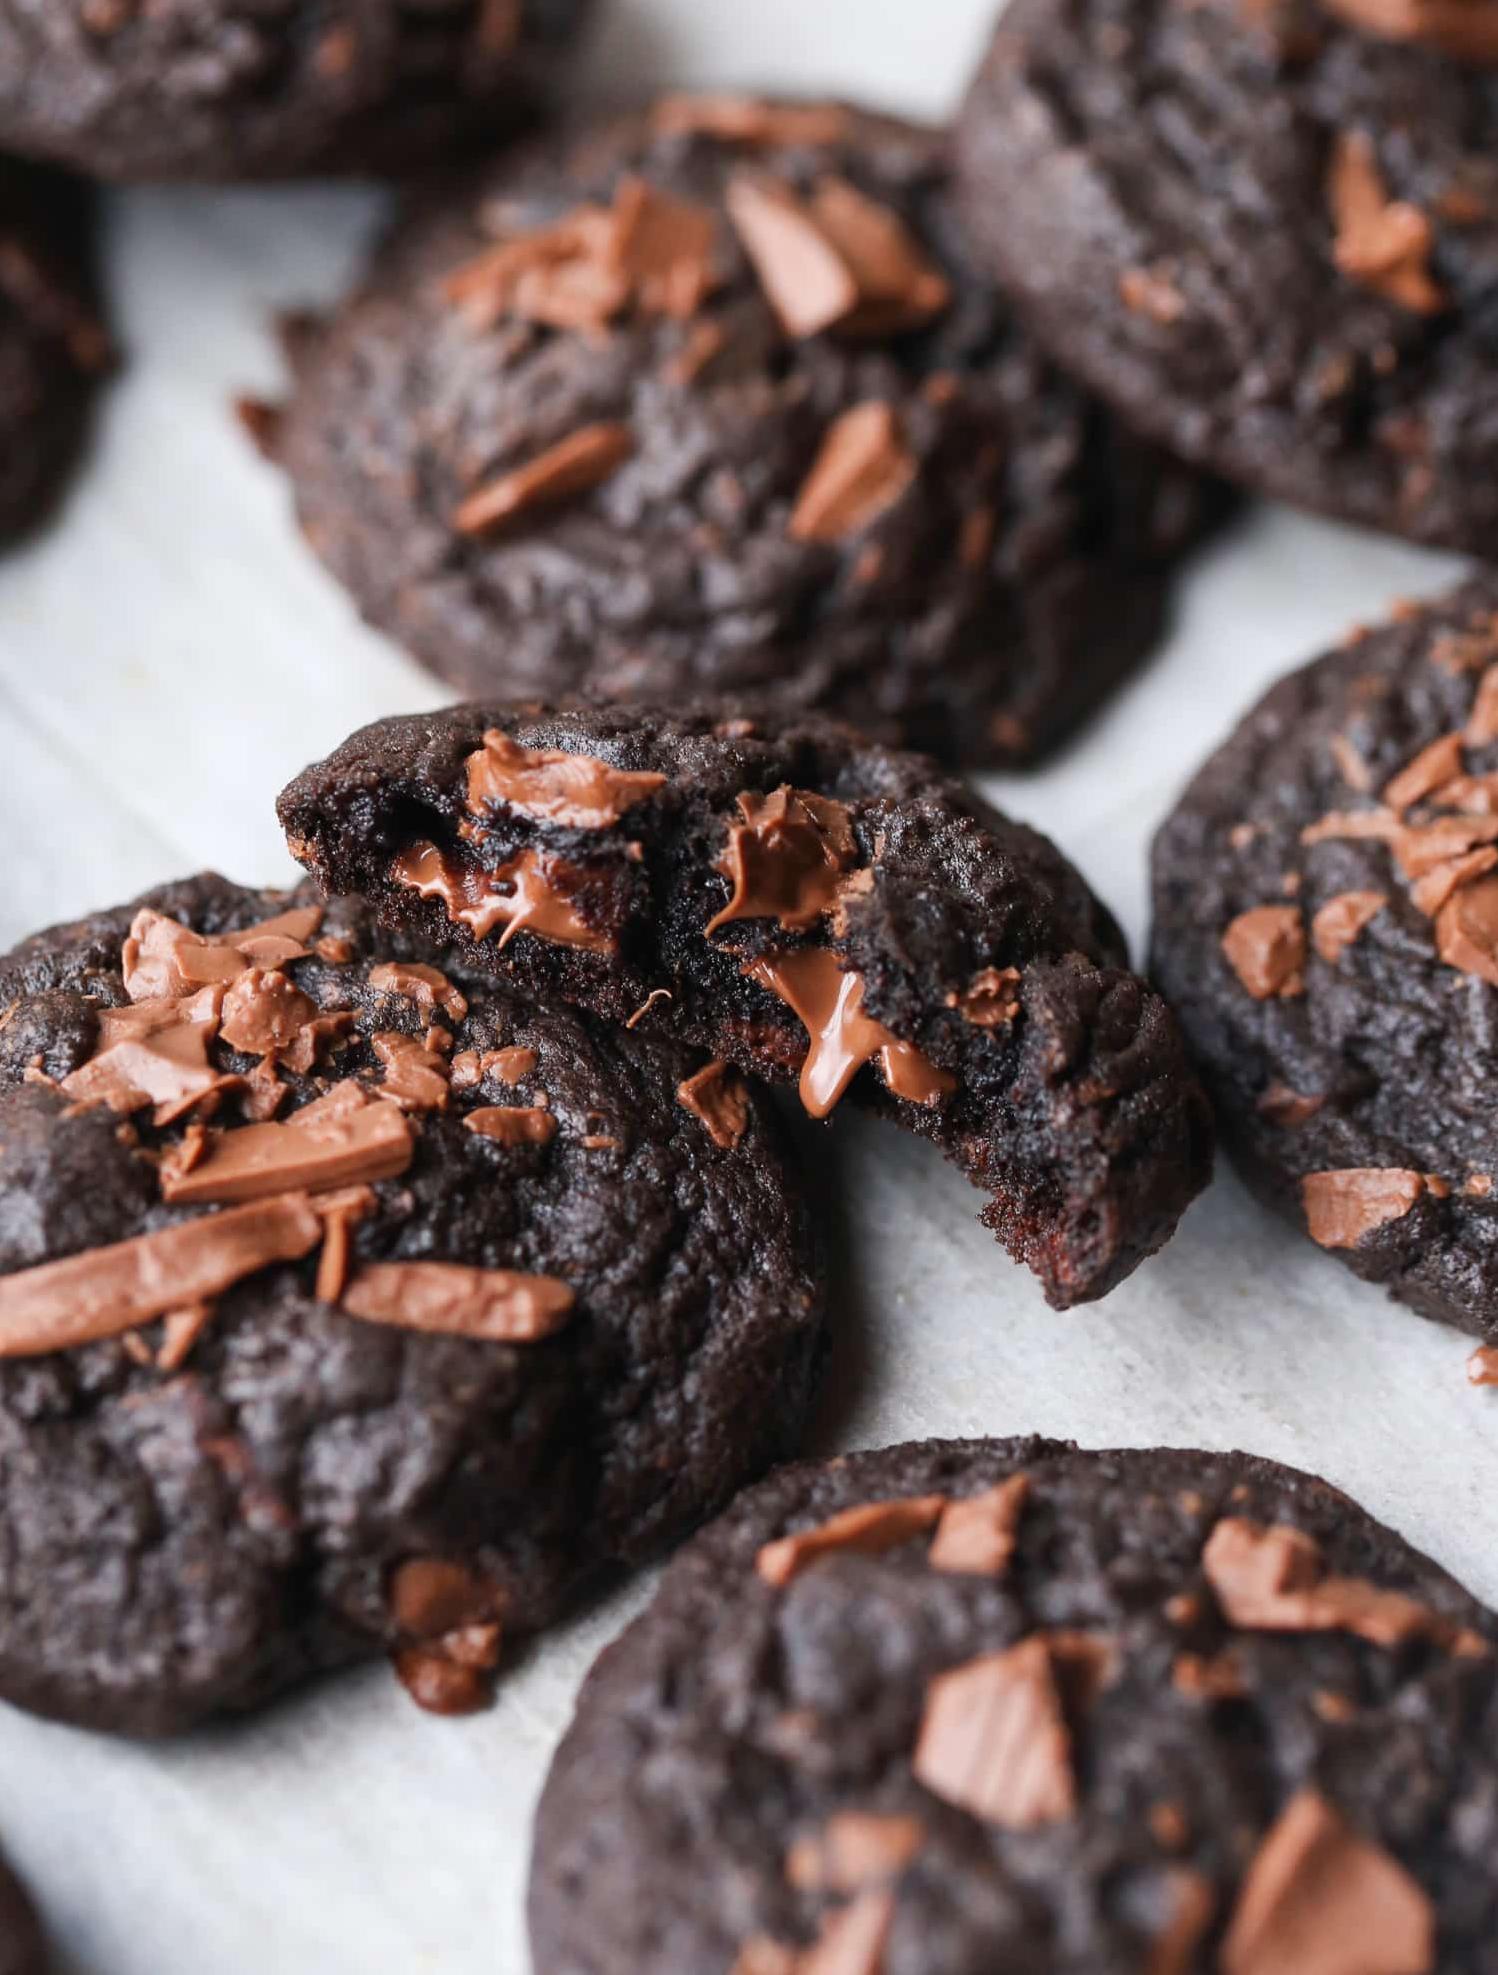  Satisfy your cookie and coffee cravings in one bite with these mocha cookies!